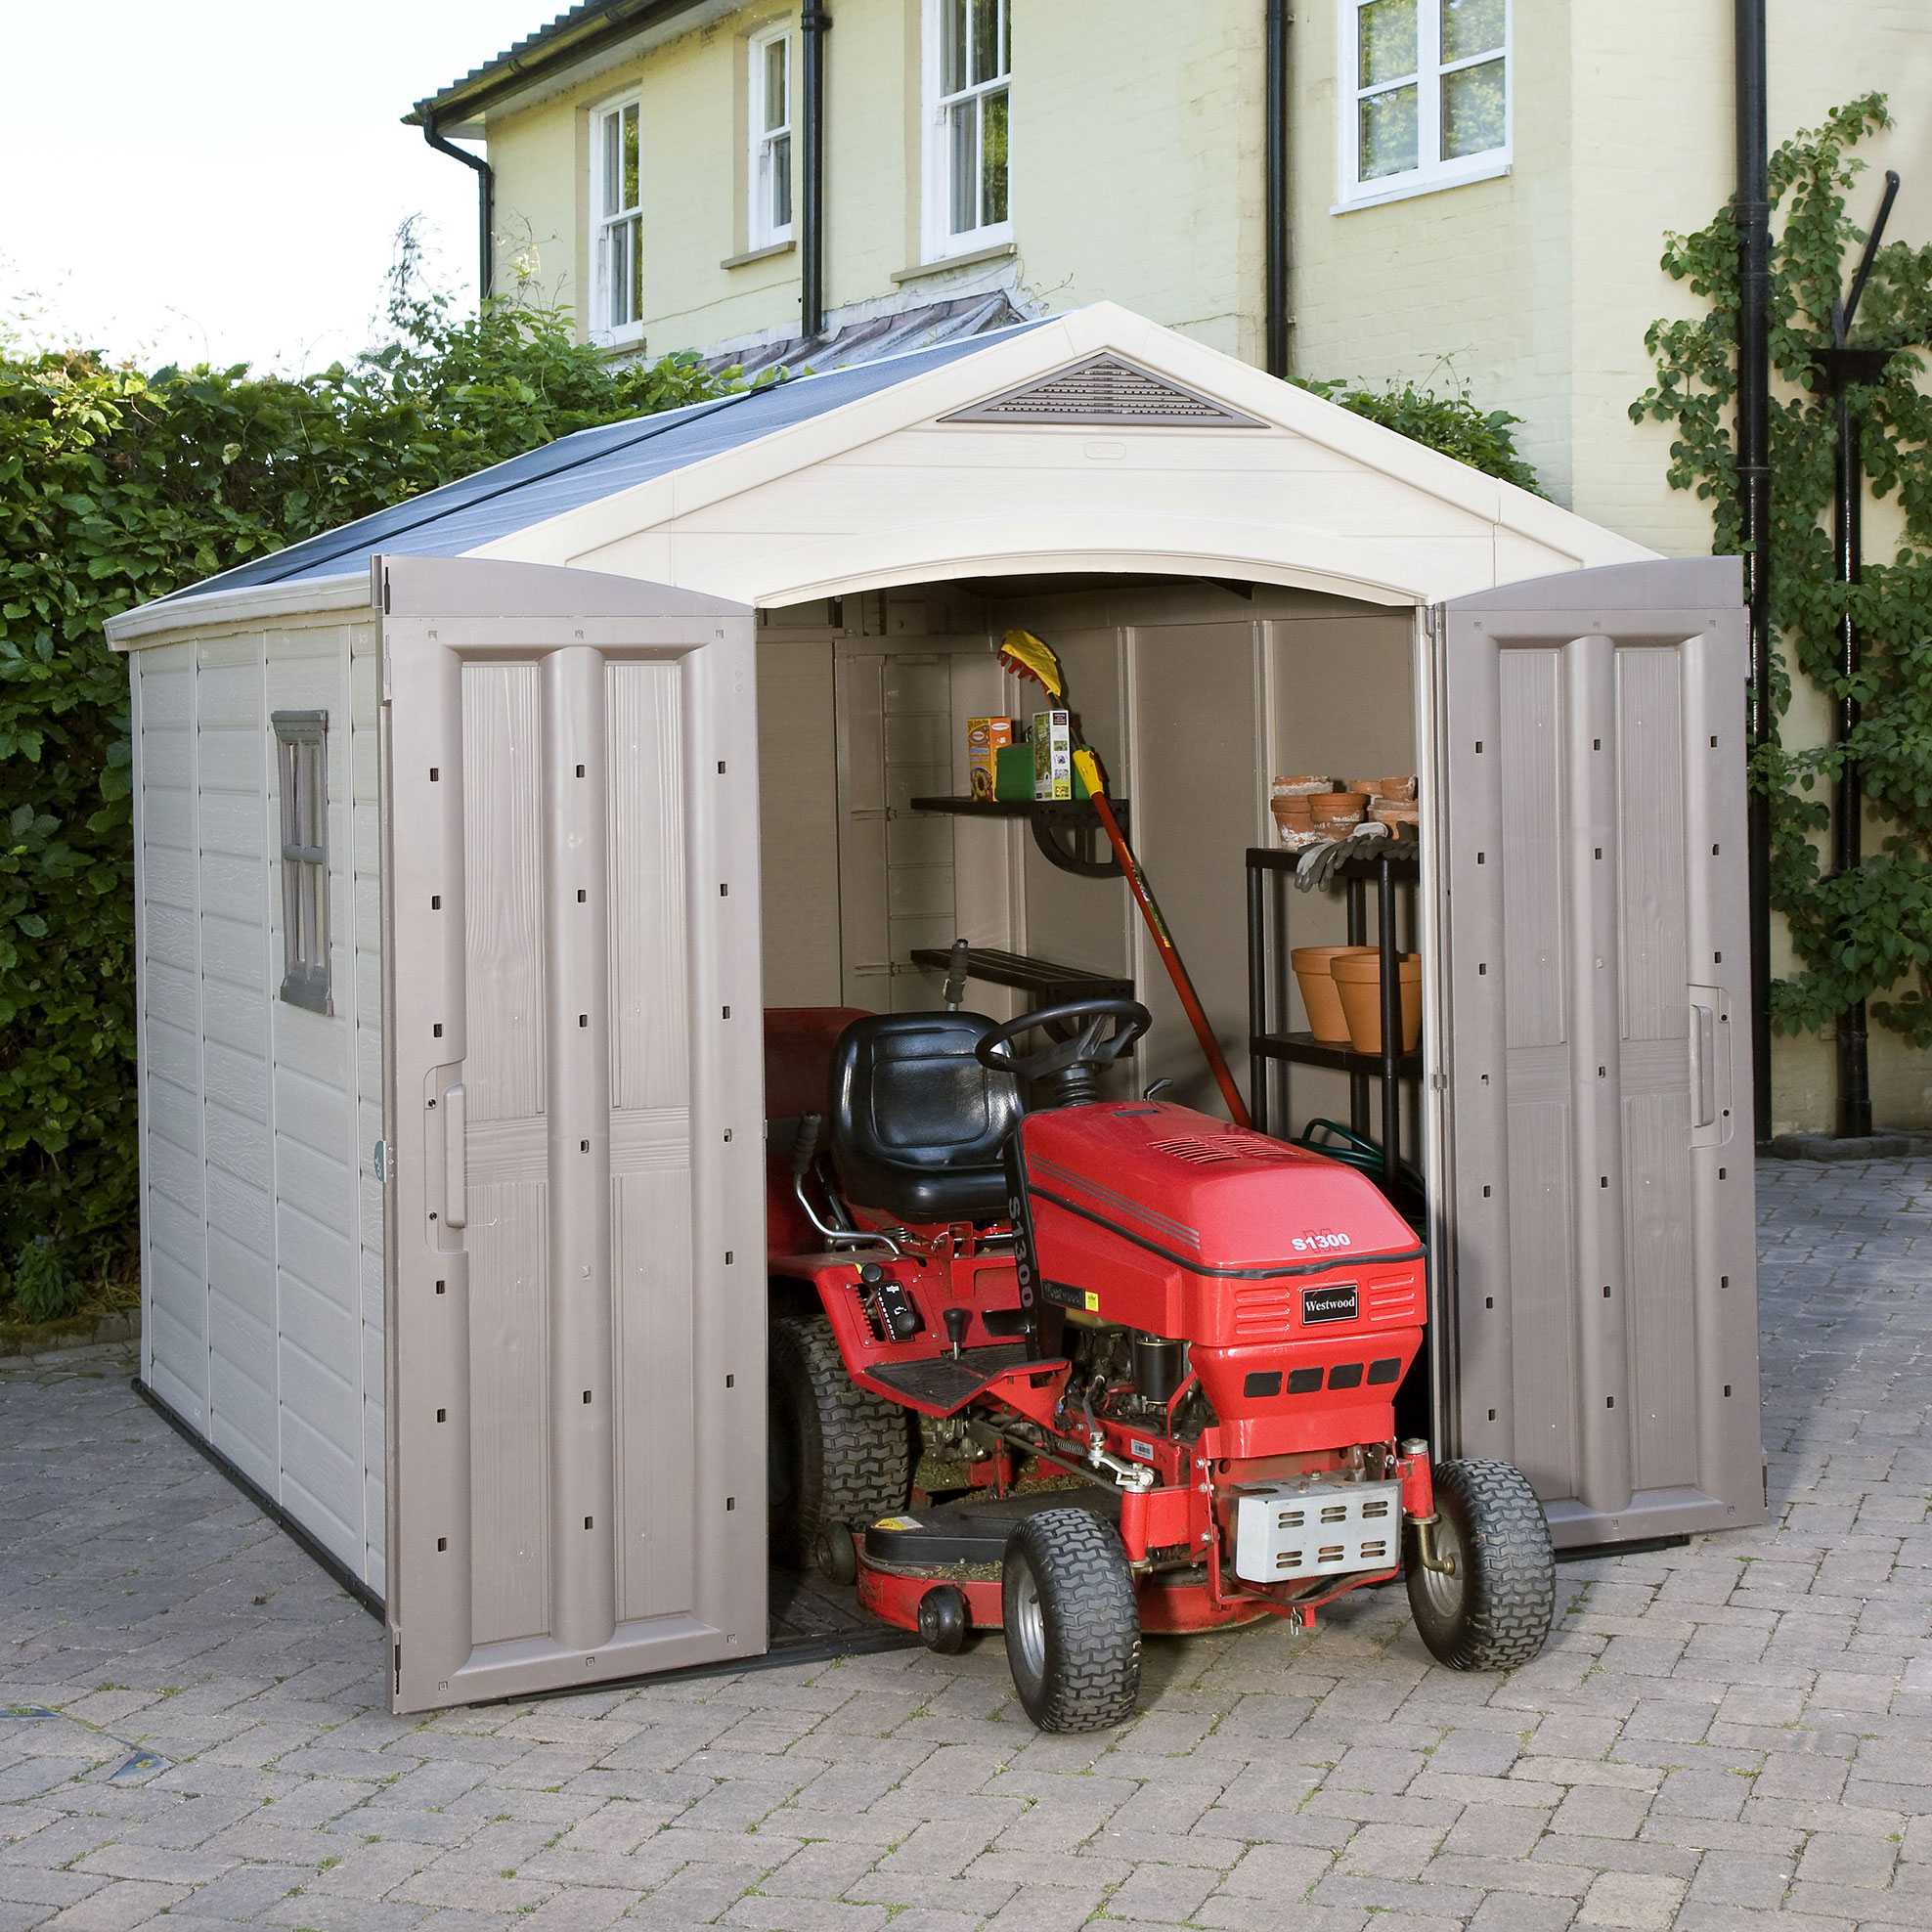 Keter Keter Factor Plastic Garden Shed 10 Year Guarantee 8x6 8x8 8x11ft Free Delivery 